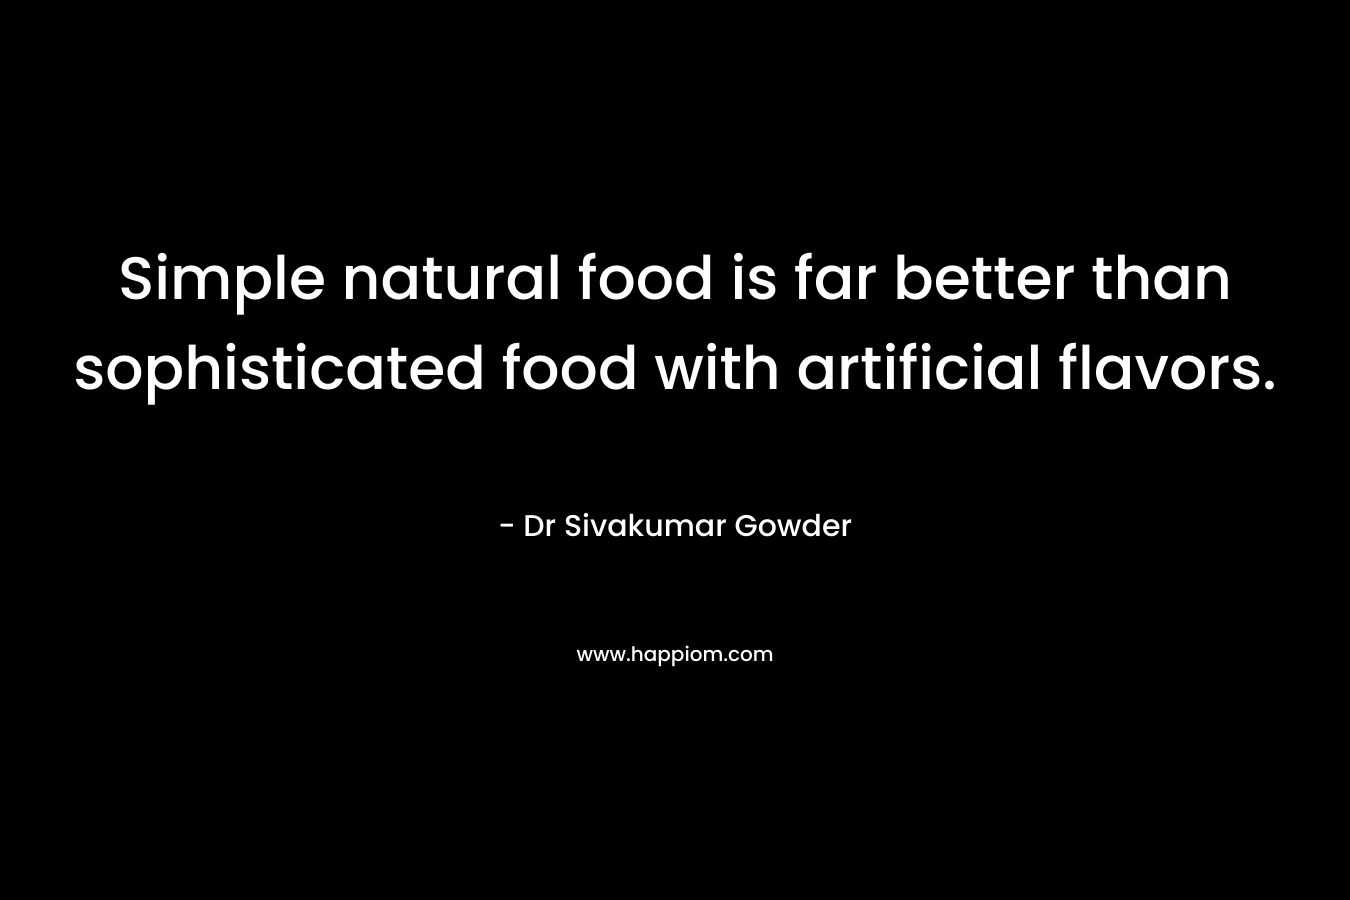 Simple natural food is far better than sophisticated food with artificial flavors.